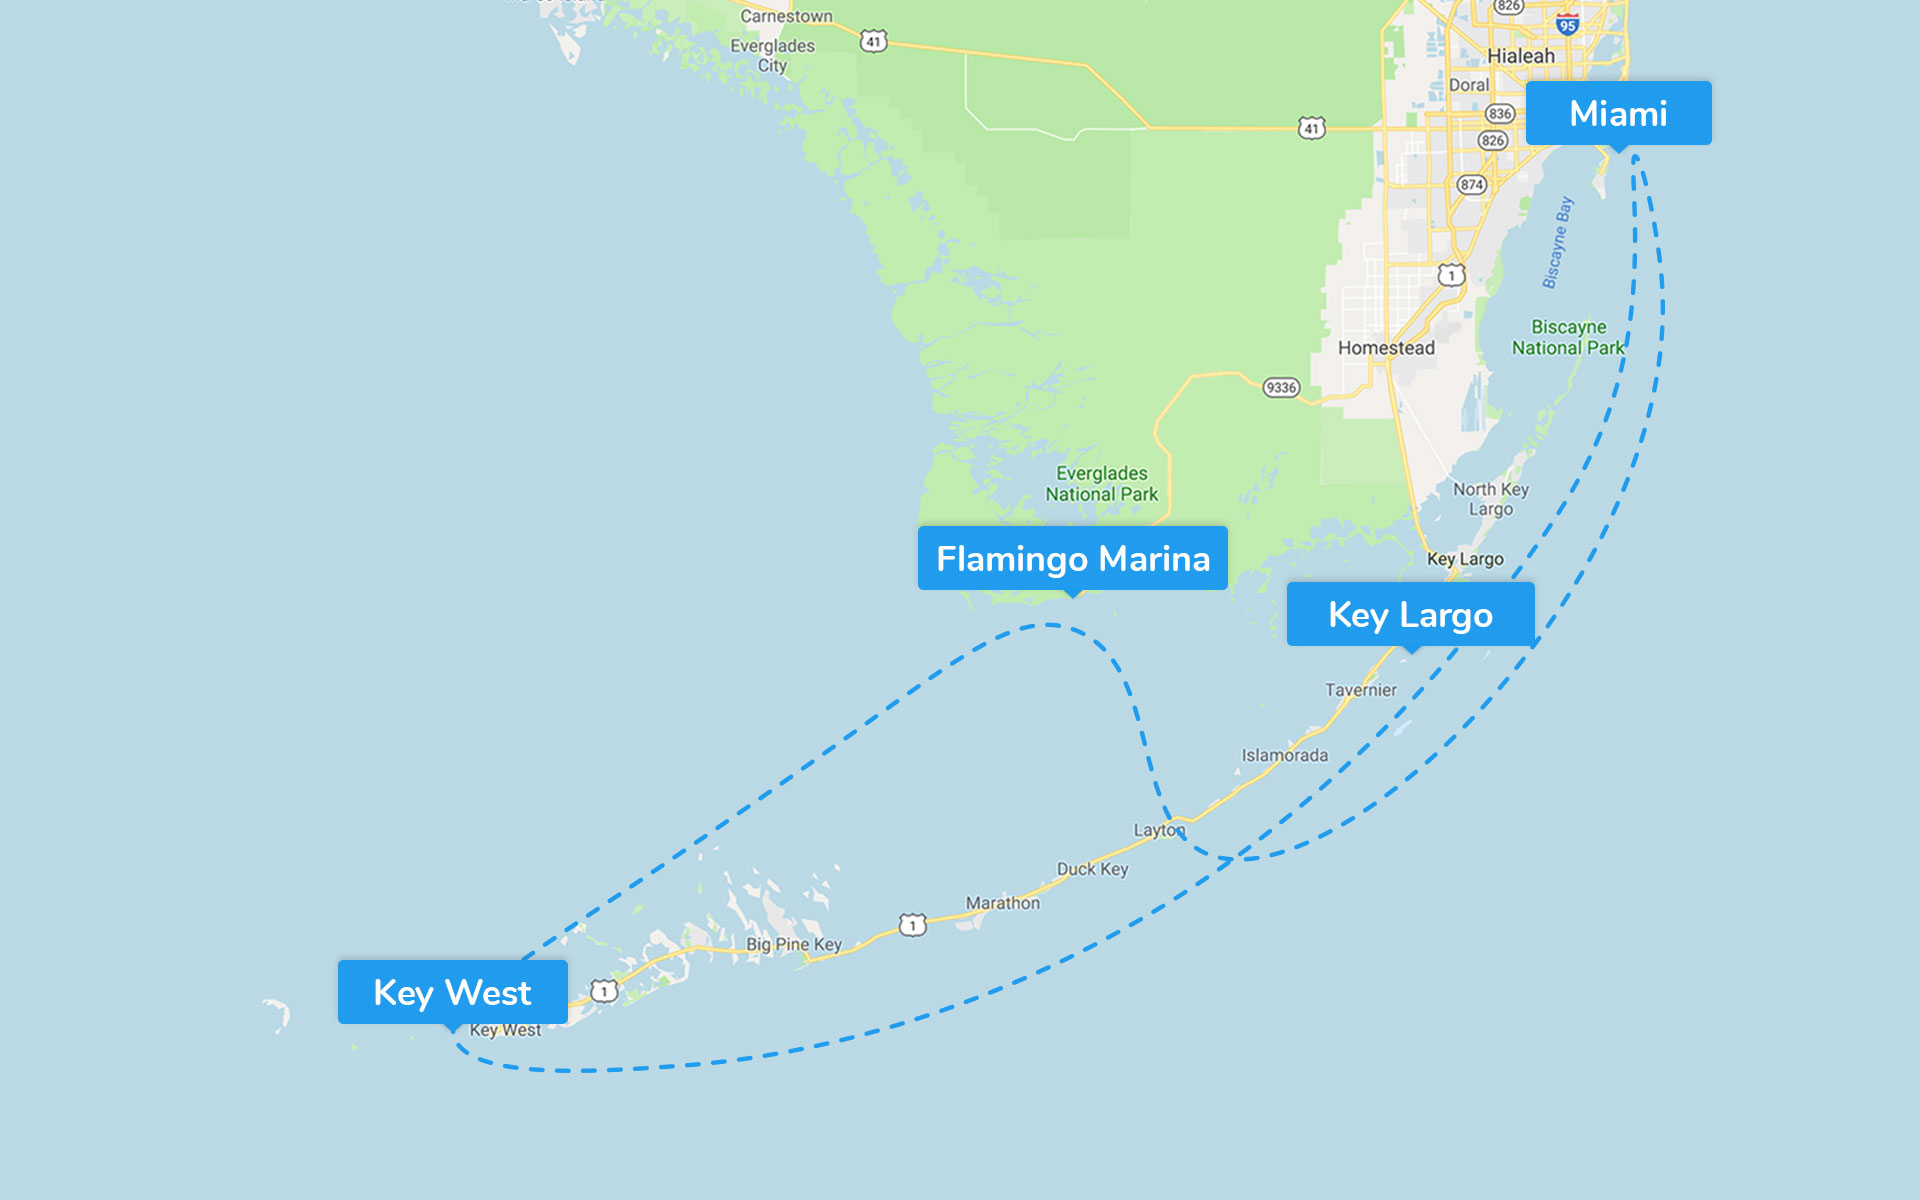 Miami, Key West and Everglades (4 days) itinerary